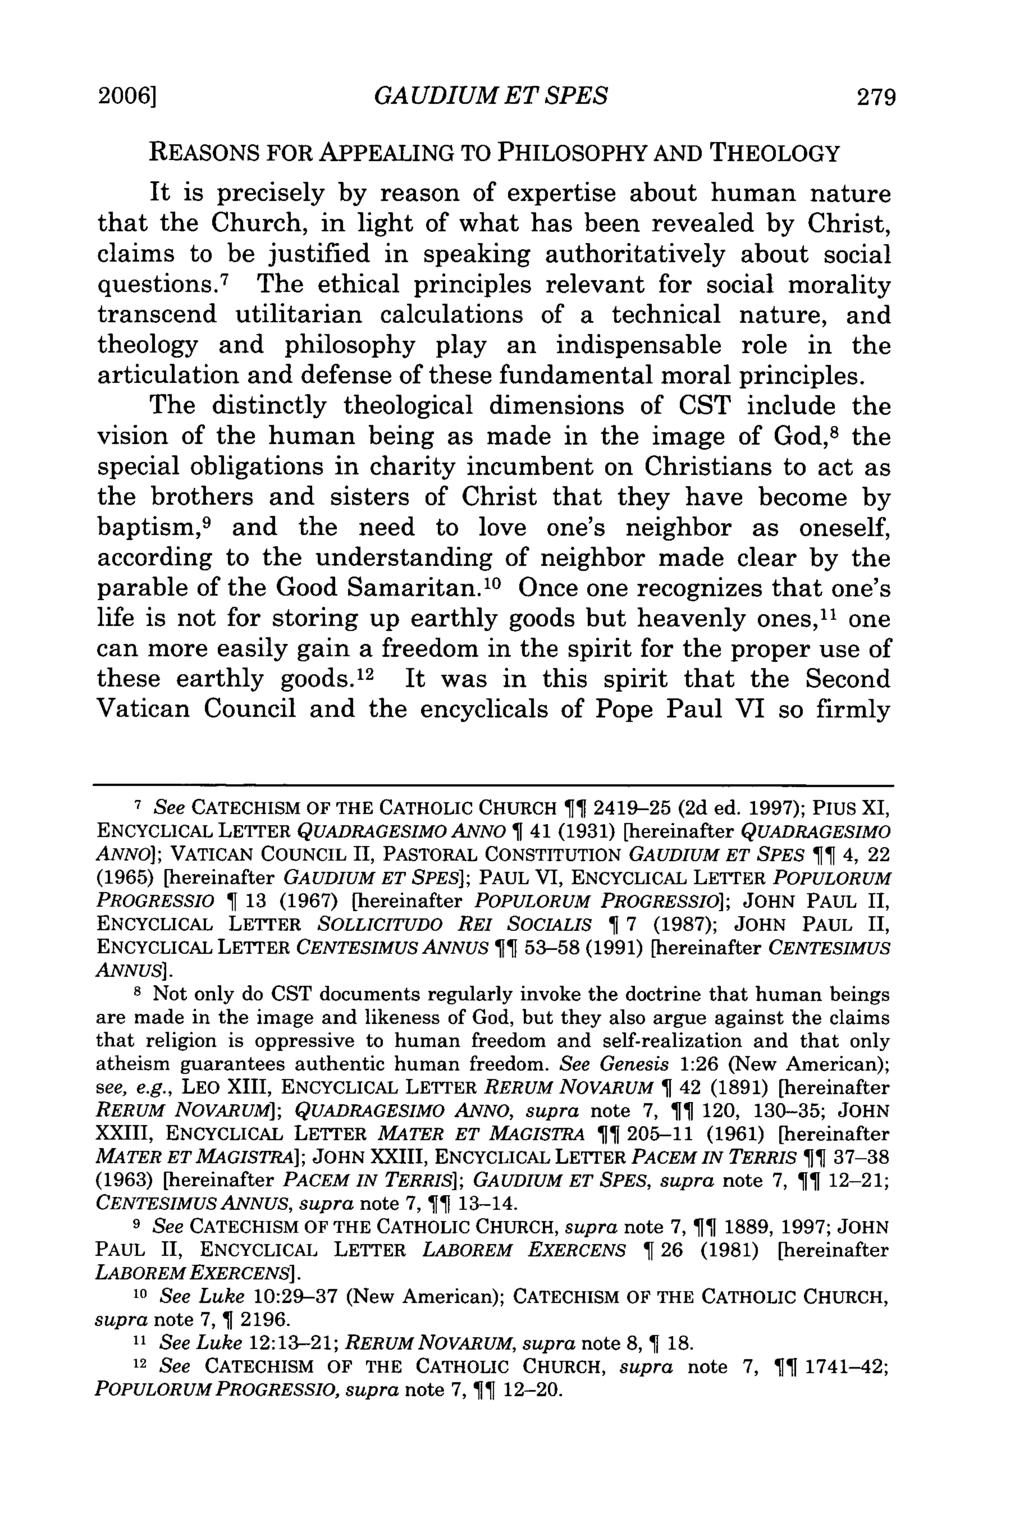 20061 GA UDIUM ET SPES REASONS FOR APPEALING TO PHILOSOPHY AND THEOLOGY It is precisely by reason of expertise about human nature that the Church, in light of what has been revealed by Christ, claims